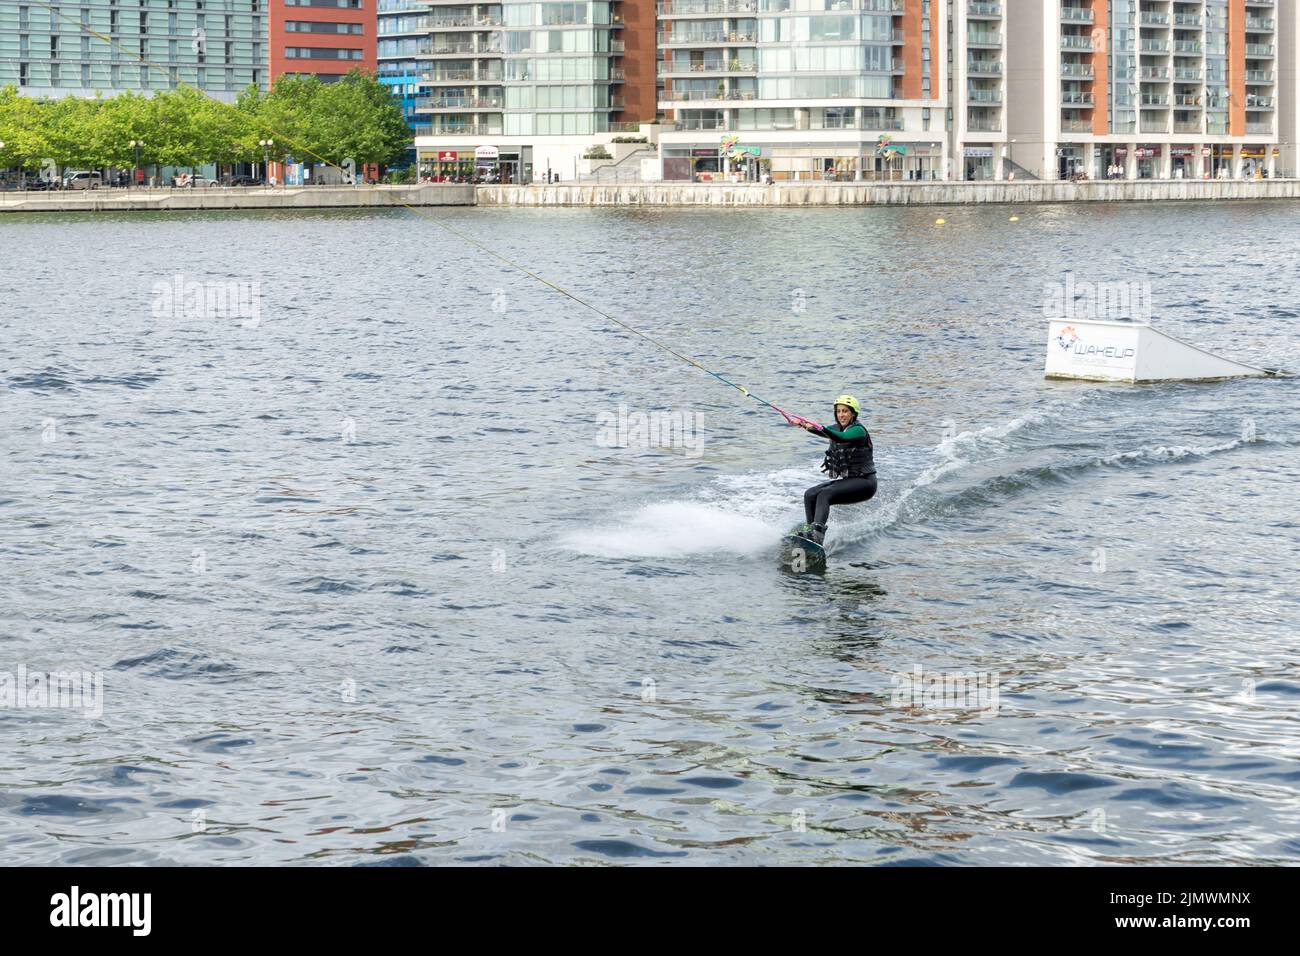 Wakeboarding at North Greenwich Stock Photo